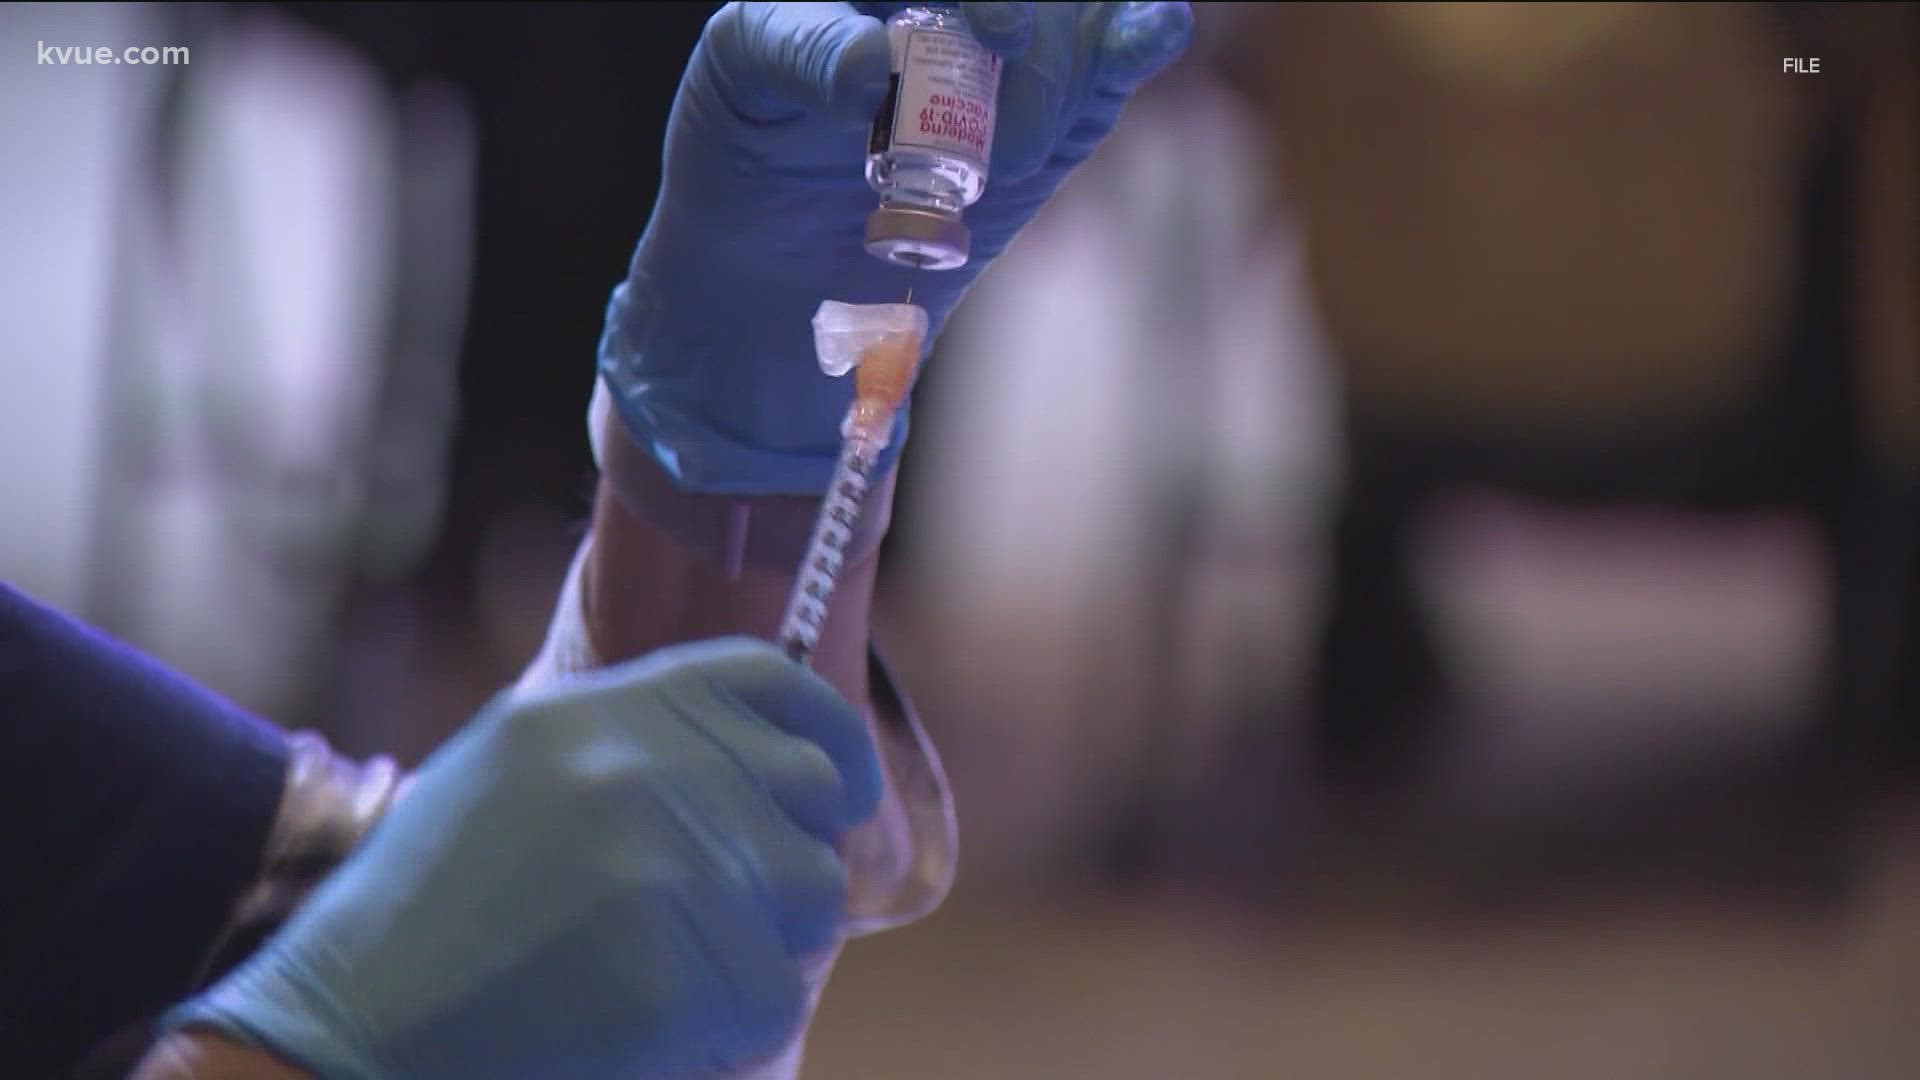 KVUE found out who can get a COVID-19 booster shot, where you can get one and more.